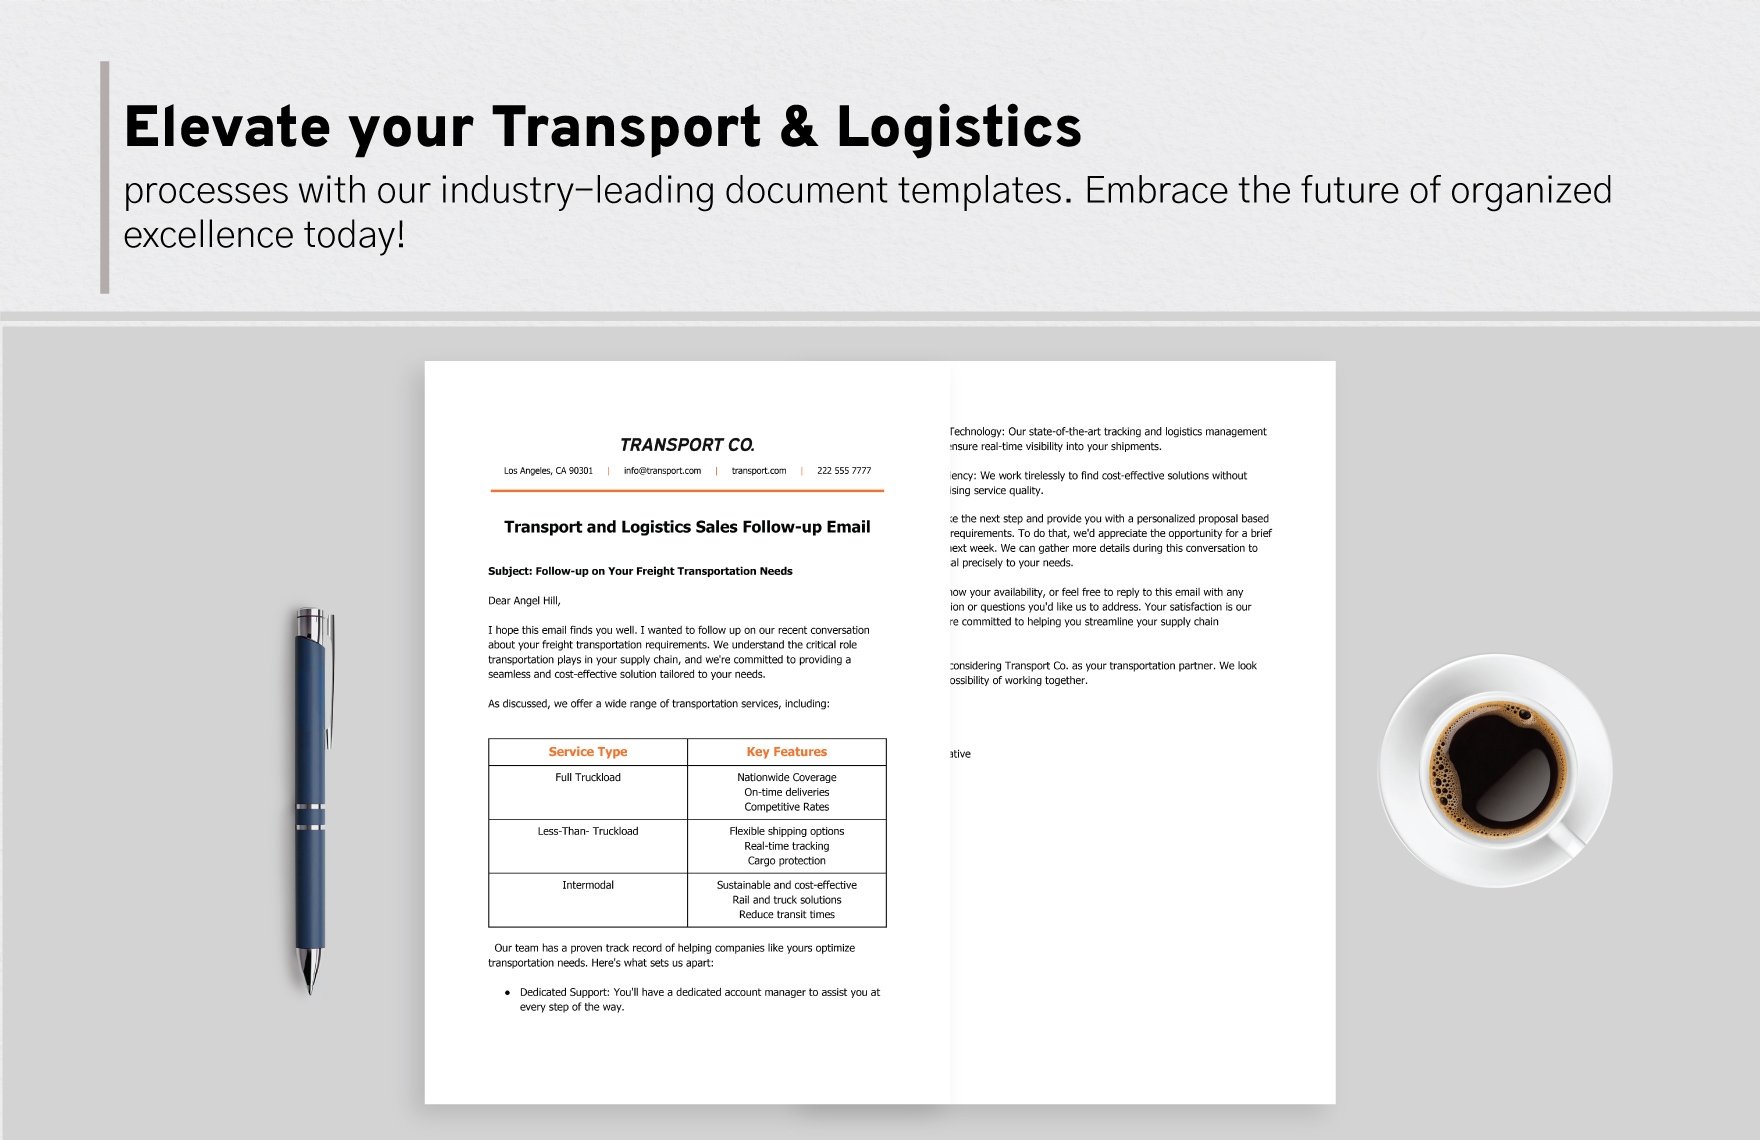 Transport and Logistics Sales Follow-up Email Template